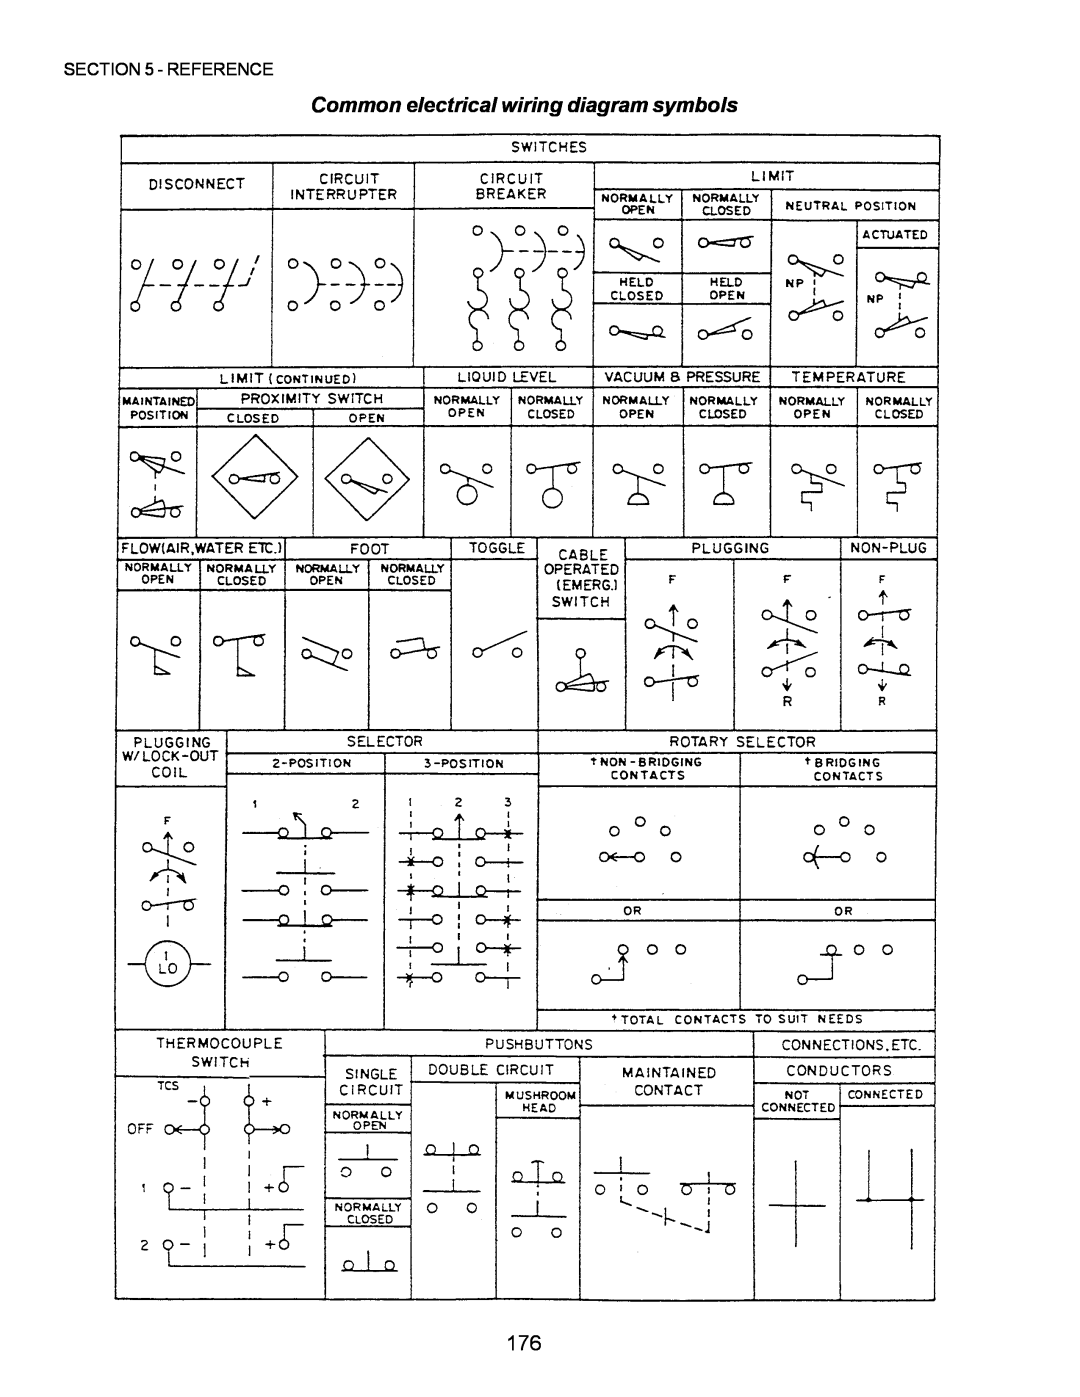 Middleby Marshall PS555, PS570, PS360, PS200, PS220, PS224 PS310 manual Common electrical wiring diagram symbols, Reference 